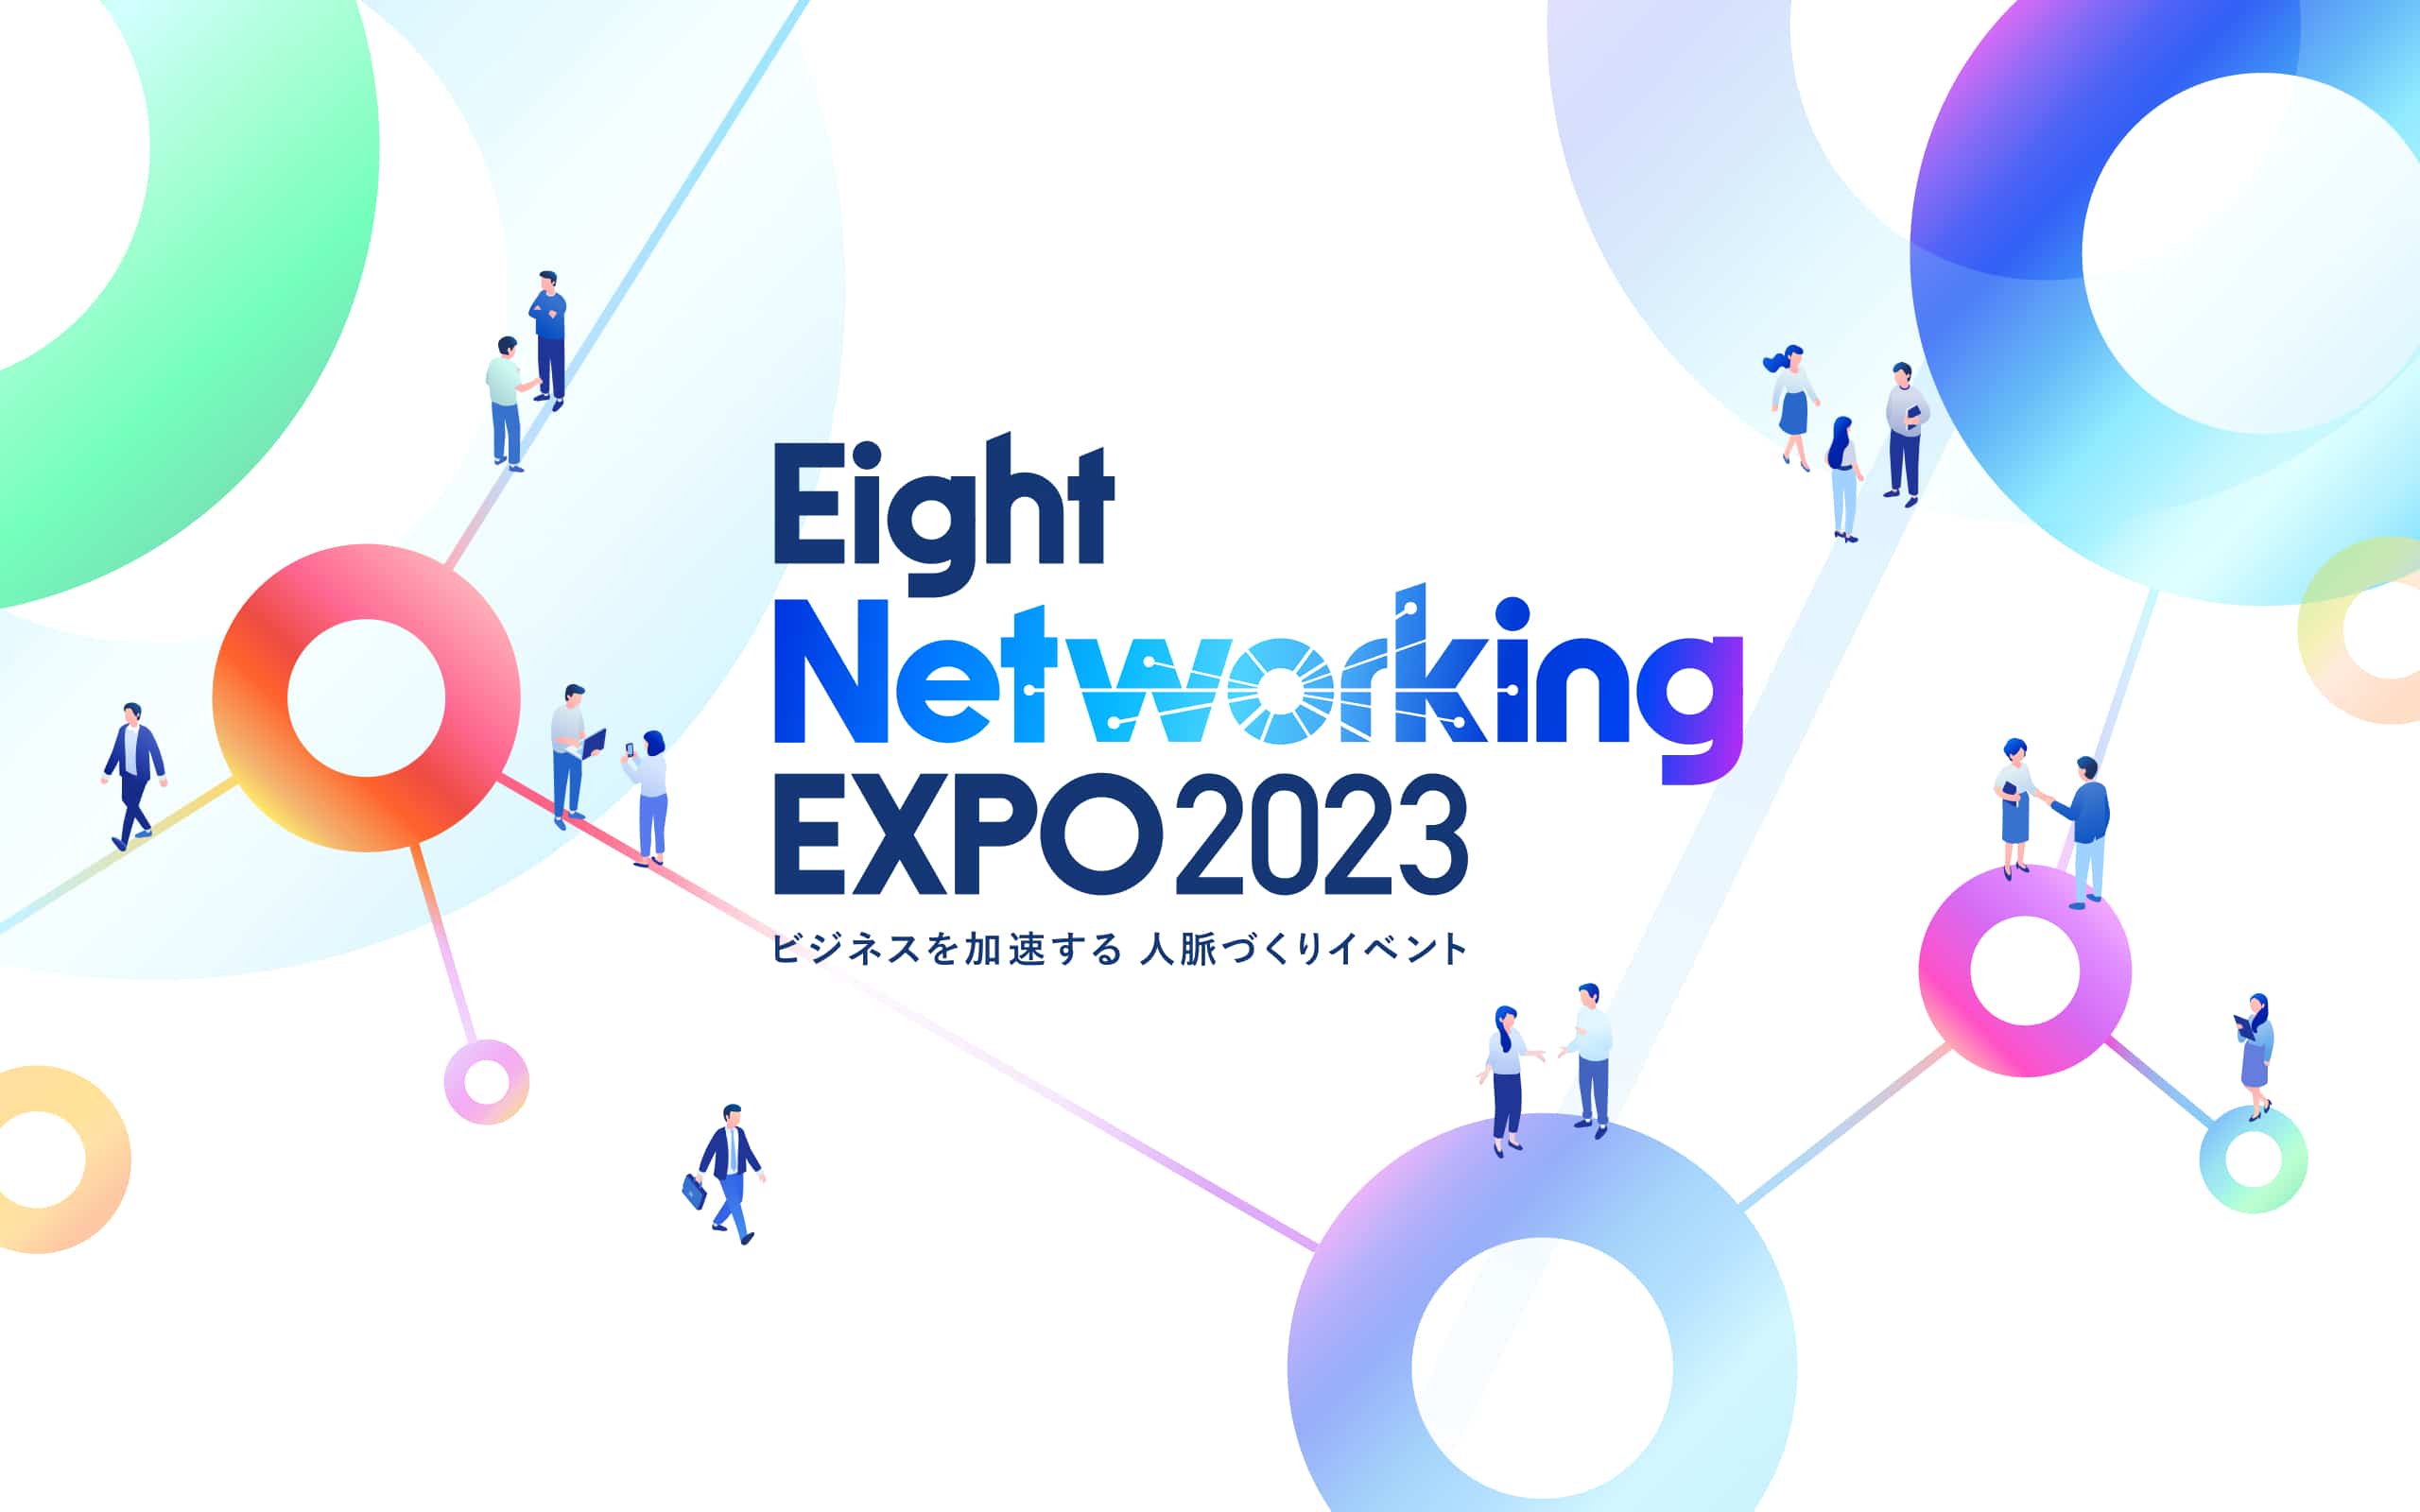 Eight Networking EXPO 2023